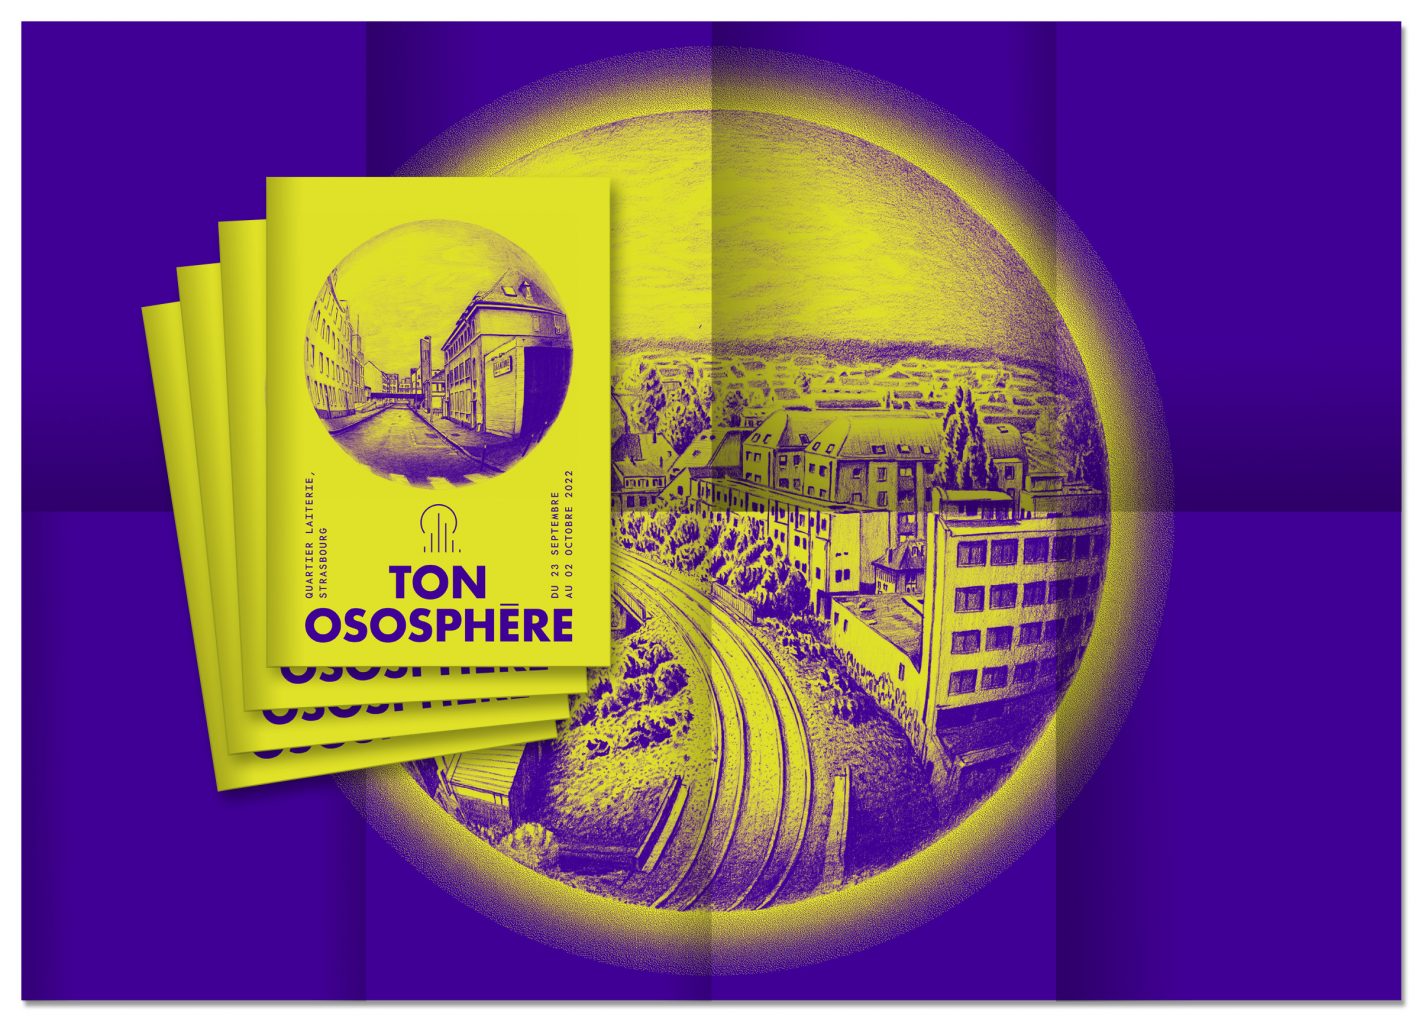 Illustrations, posters, leaflet, L’Ososphère Festival, Septembre 2022, designed by In the shade of a tree studio, founded by Sophie Demay and Maël Fournier Comte, joined by Jimmy Cintero.